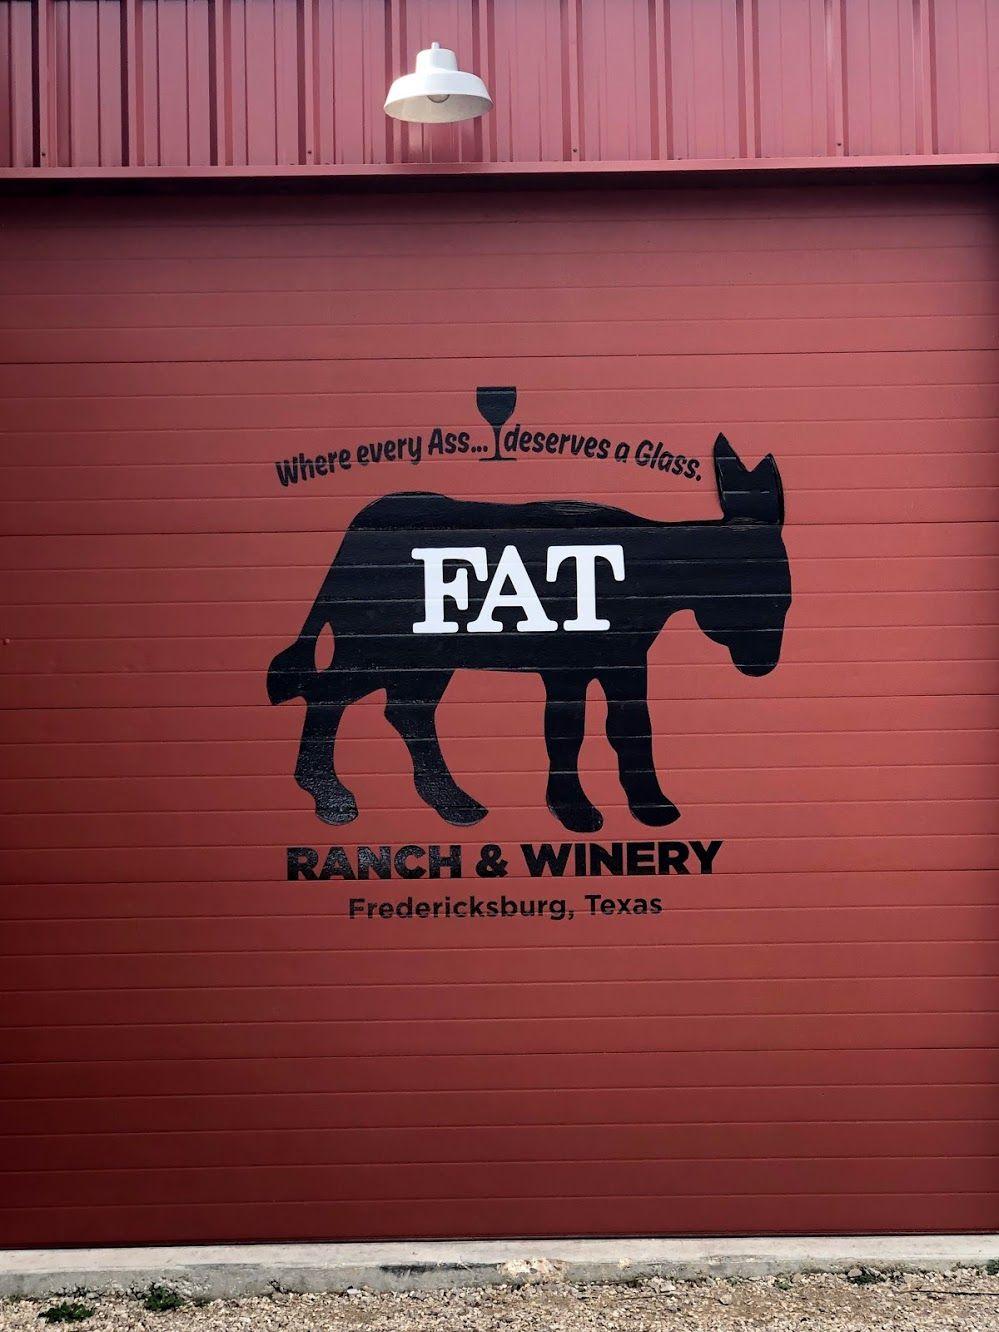 The logo for Fat Ass Ranch & Winery on a red garage door.